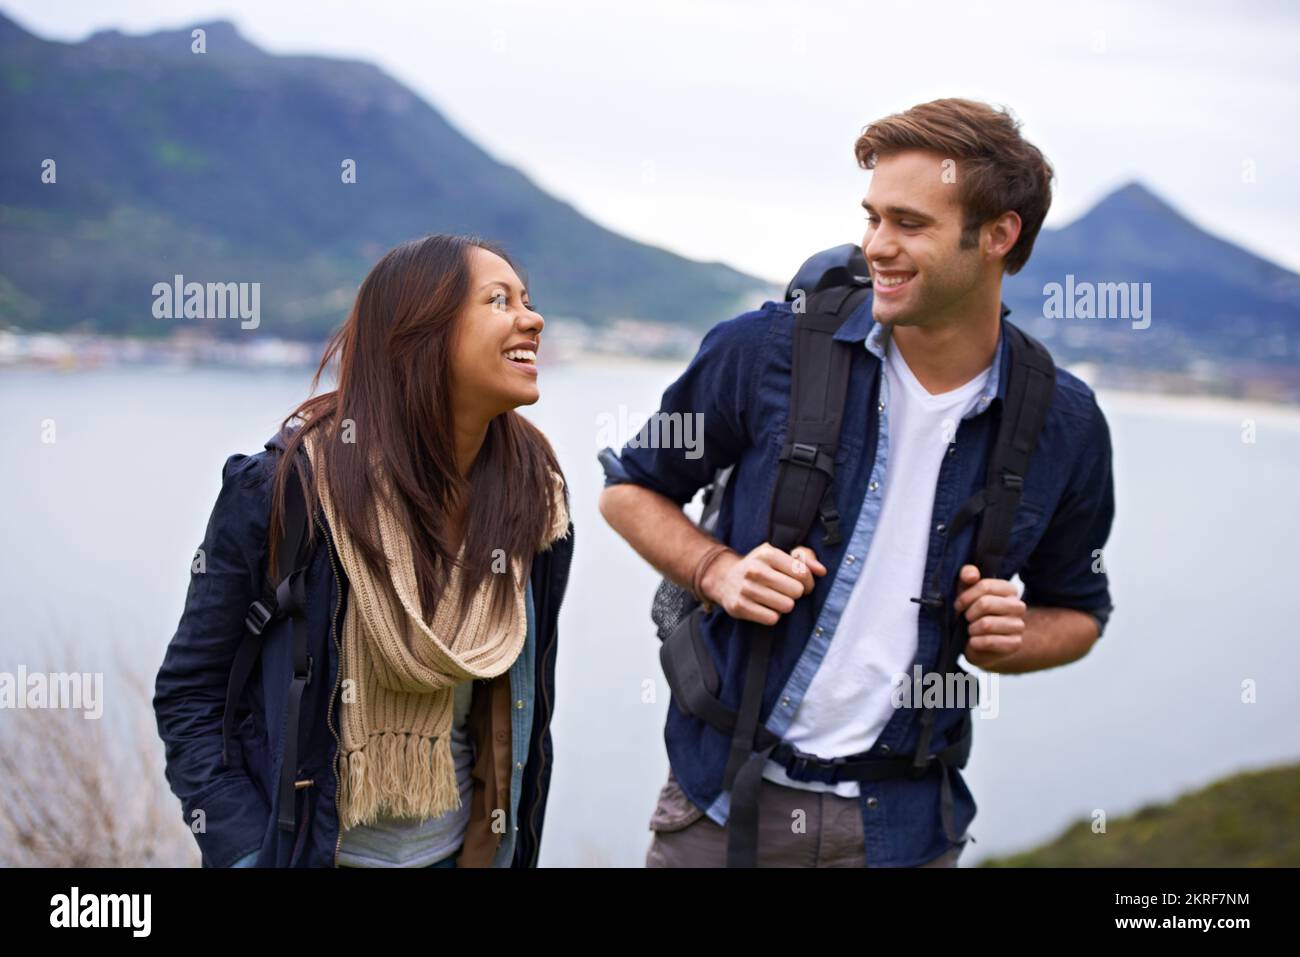 Exploration of nature and their love. A young couple with backpacks enjoying nature. Stock Photo